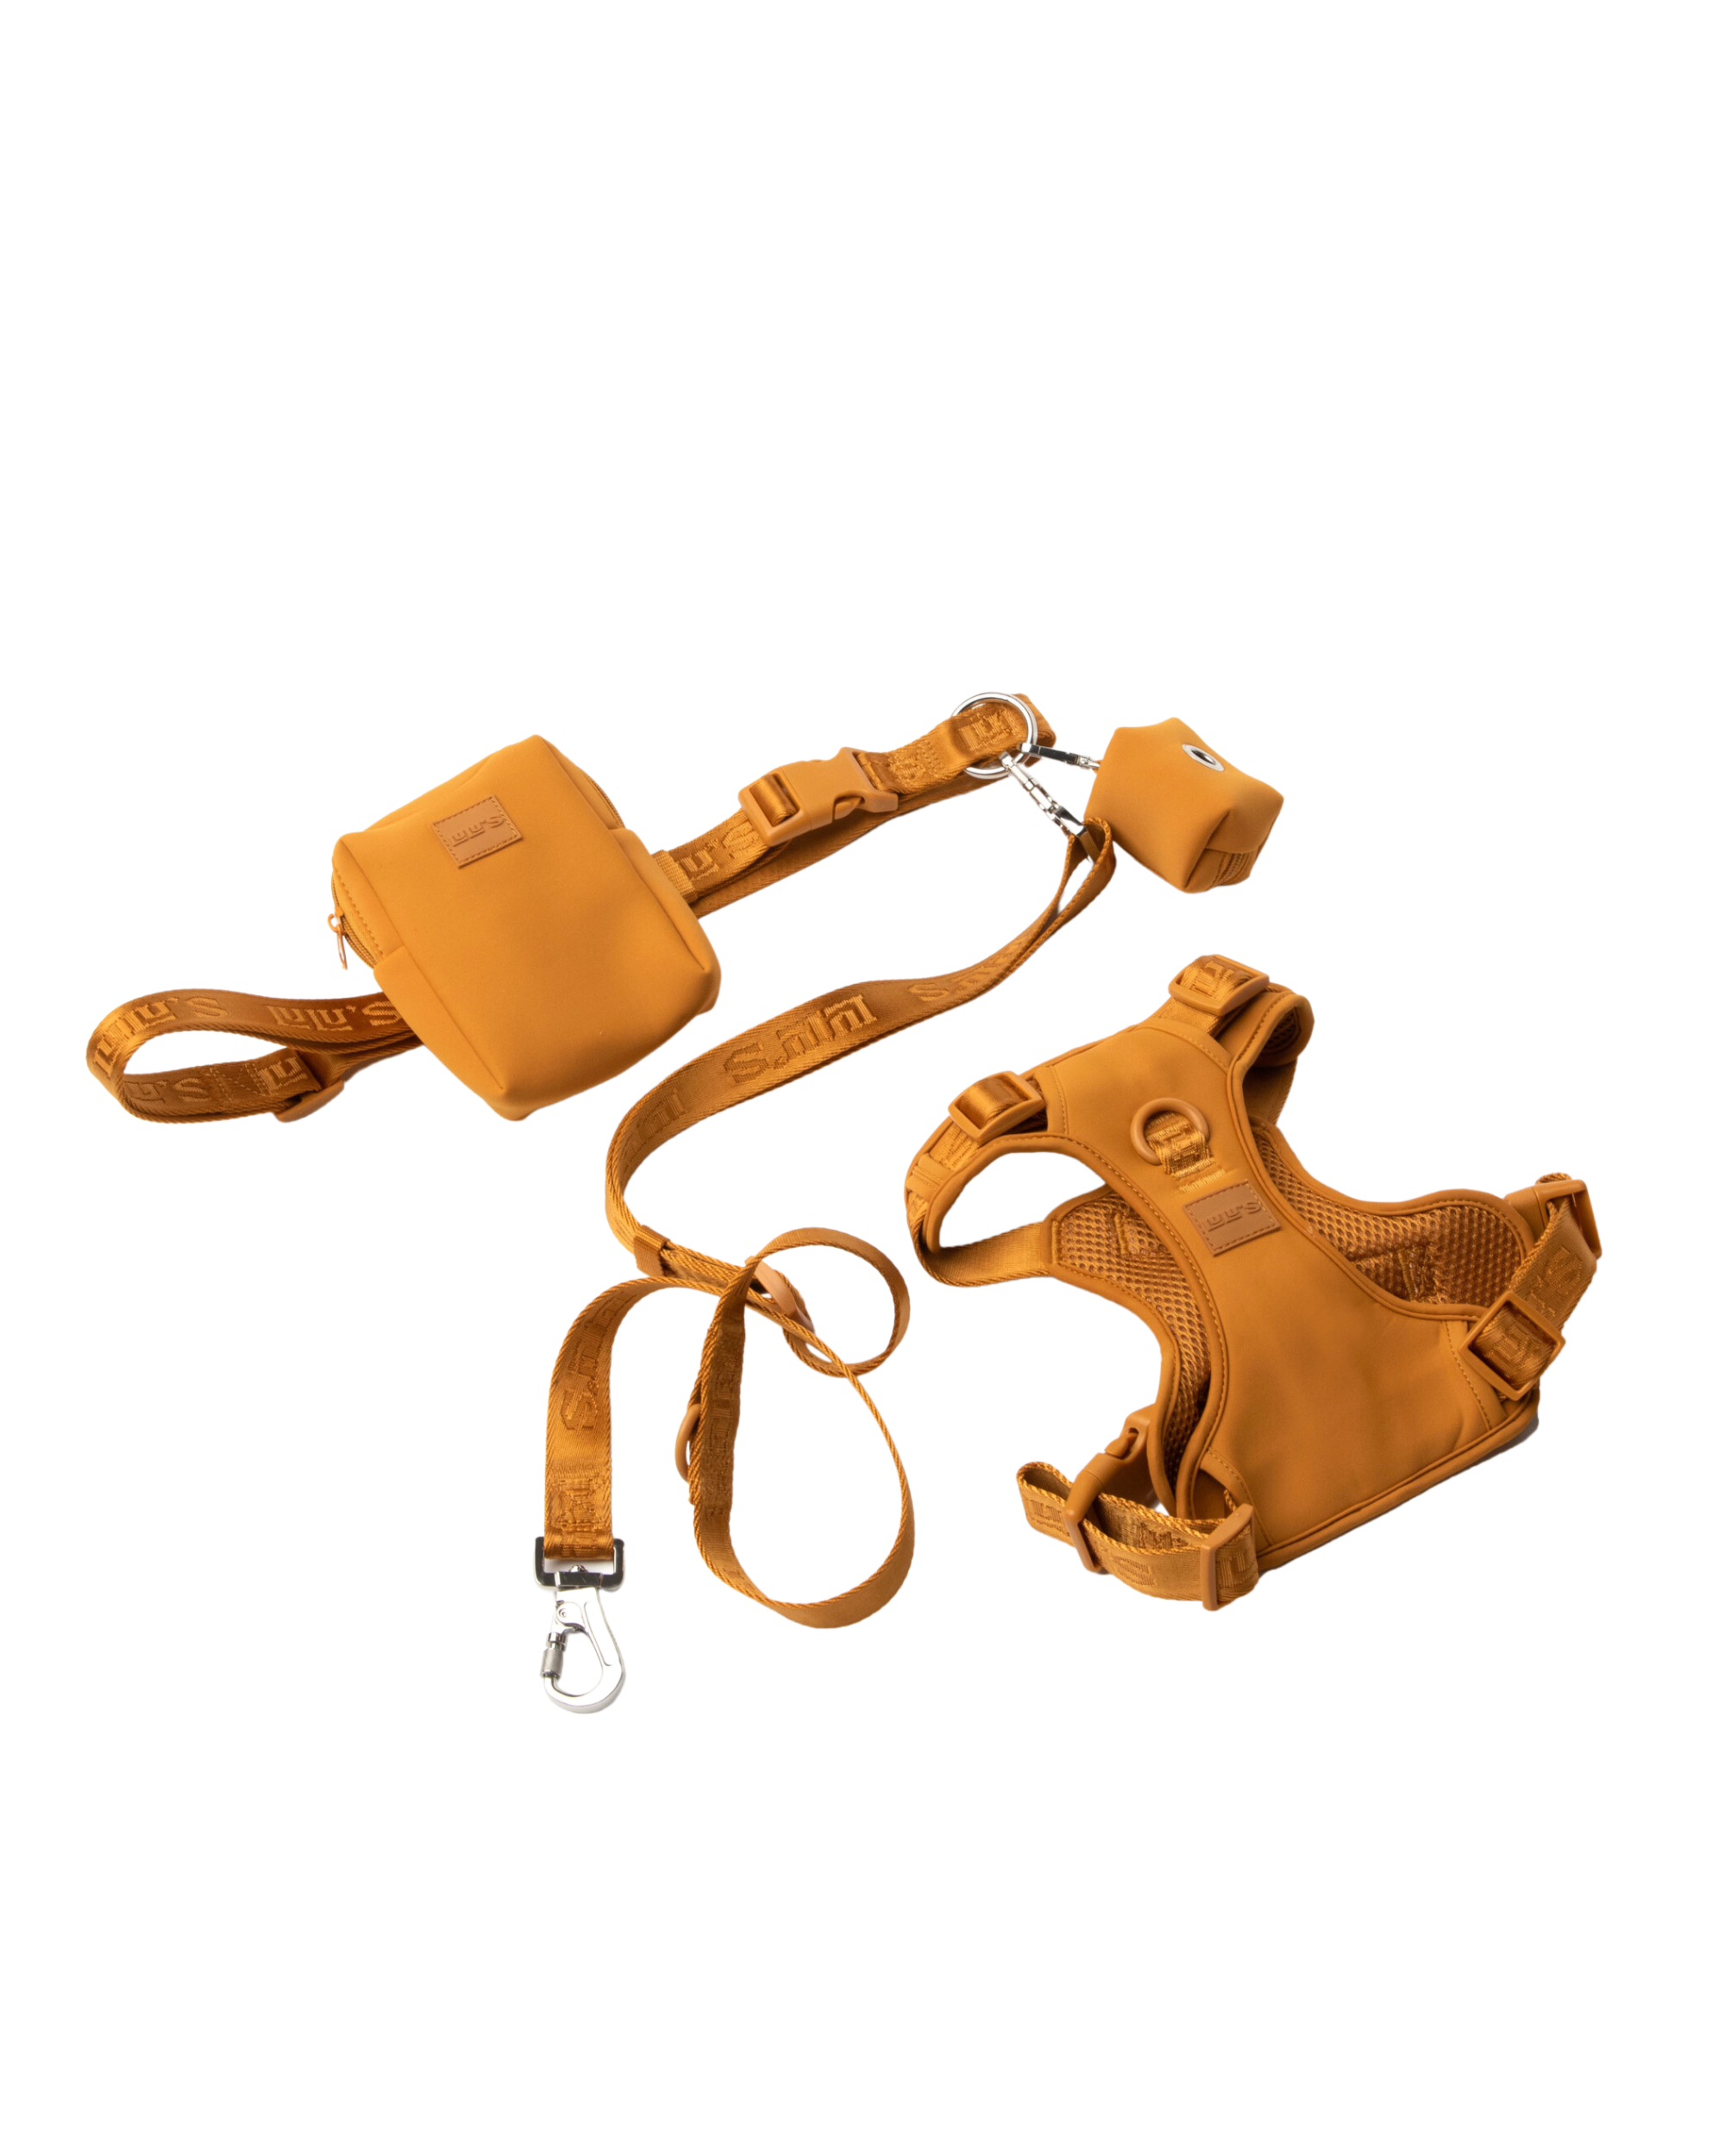 LULU's set in Sand orange, featuring a matching dog harness, leash, belt with an accessory pouch, and a small poop bag holder. The set is arranged on a white background, showcasing its coordinated design and practicality for dog walking